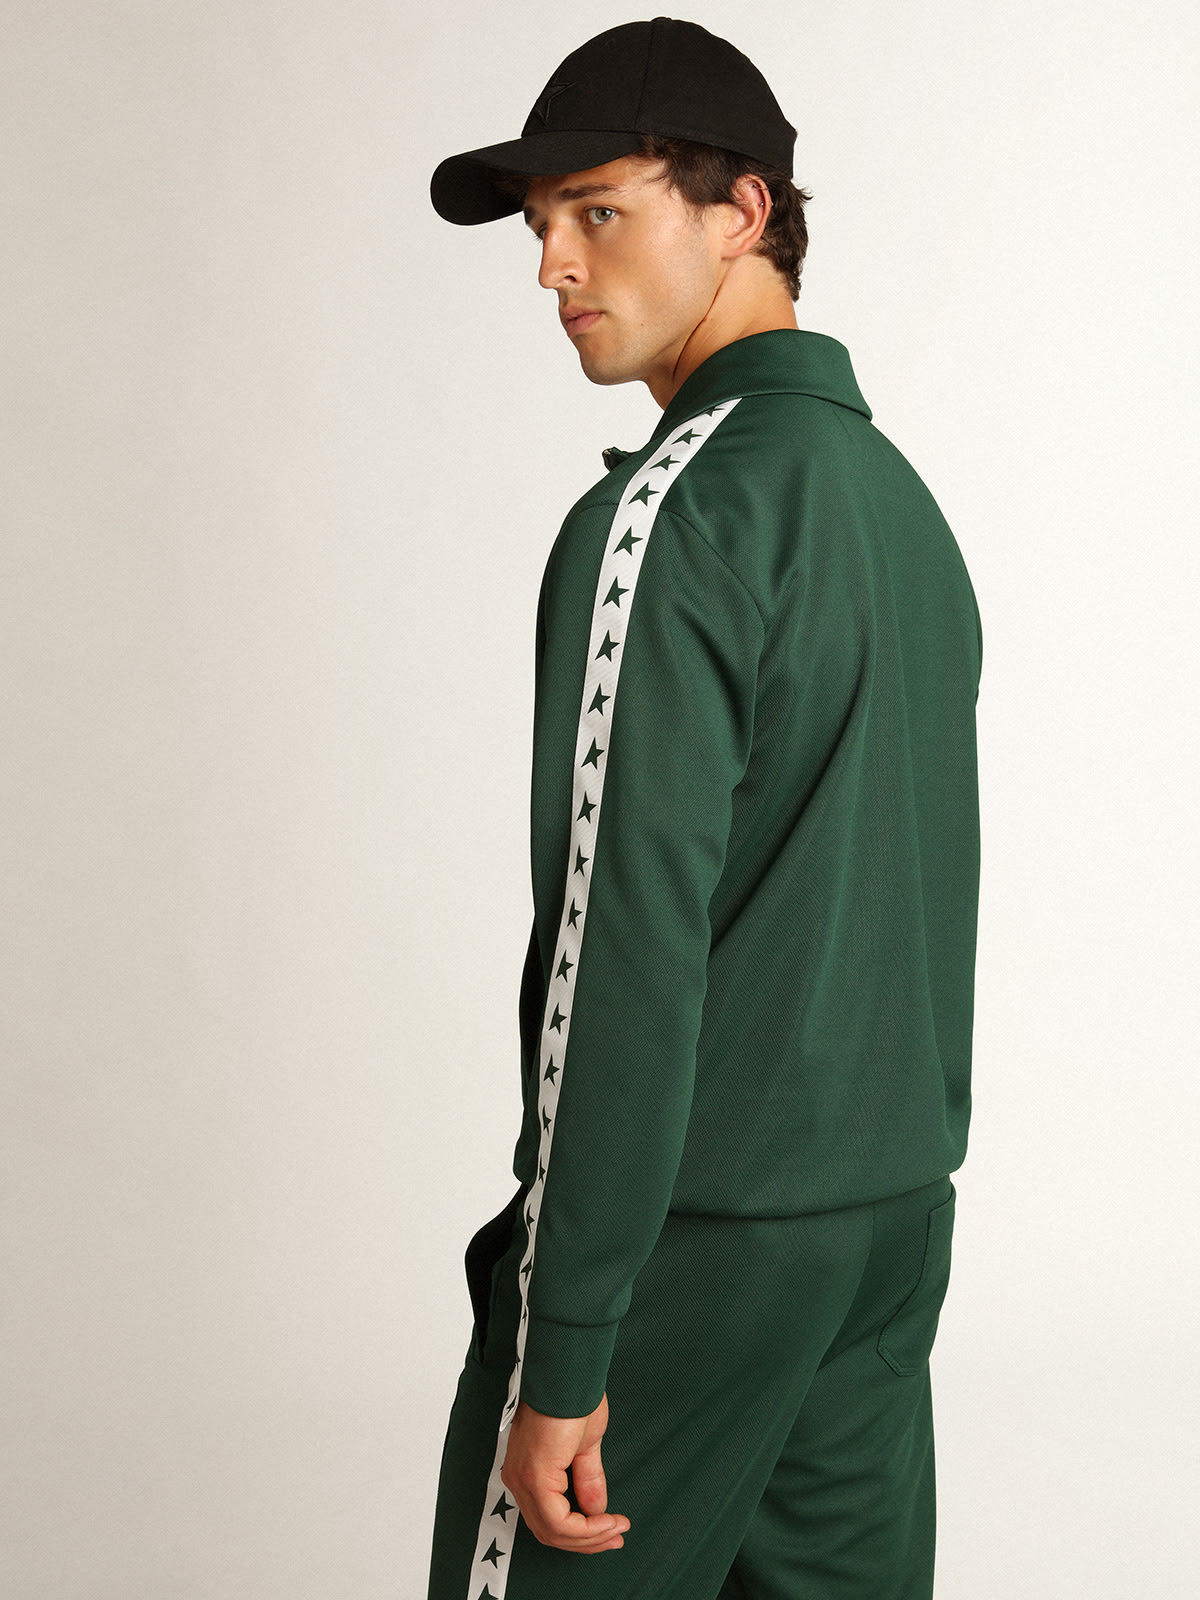 Golden Goose - Bright-green Denis Star Collection zipped sweatshirt with white strip and contrasting green stars in 